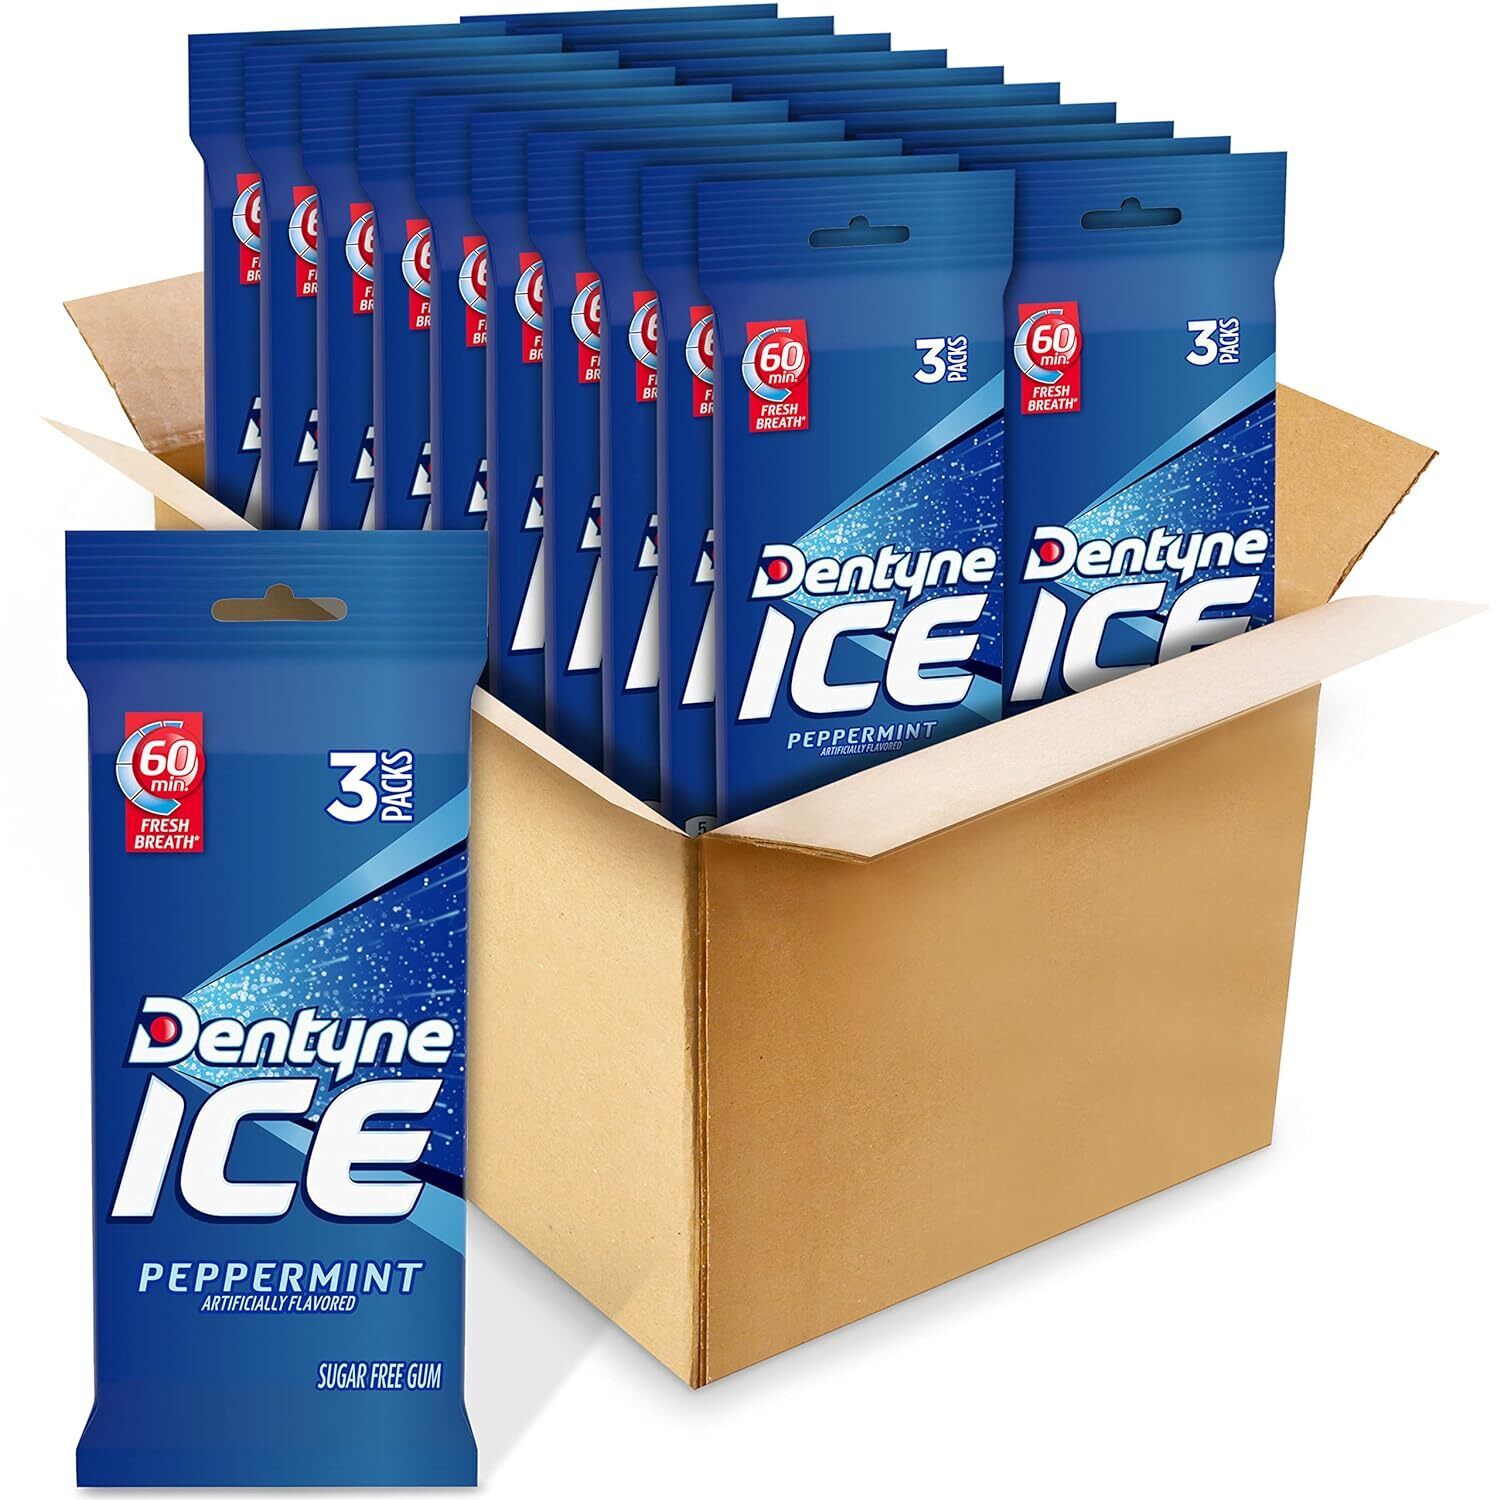 Dentyne Ice Peppermint Sugar Free Gum, 60 Packs of 16 Pieces (960 Total Pieces)*